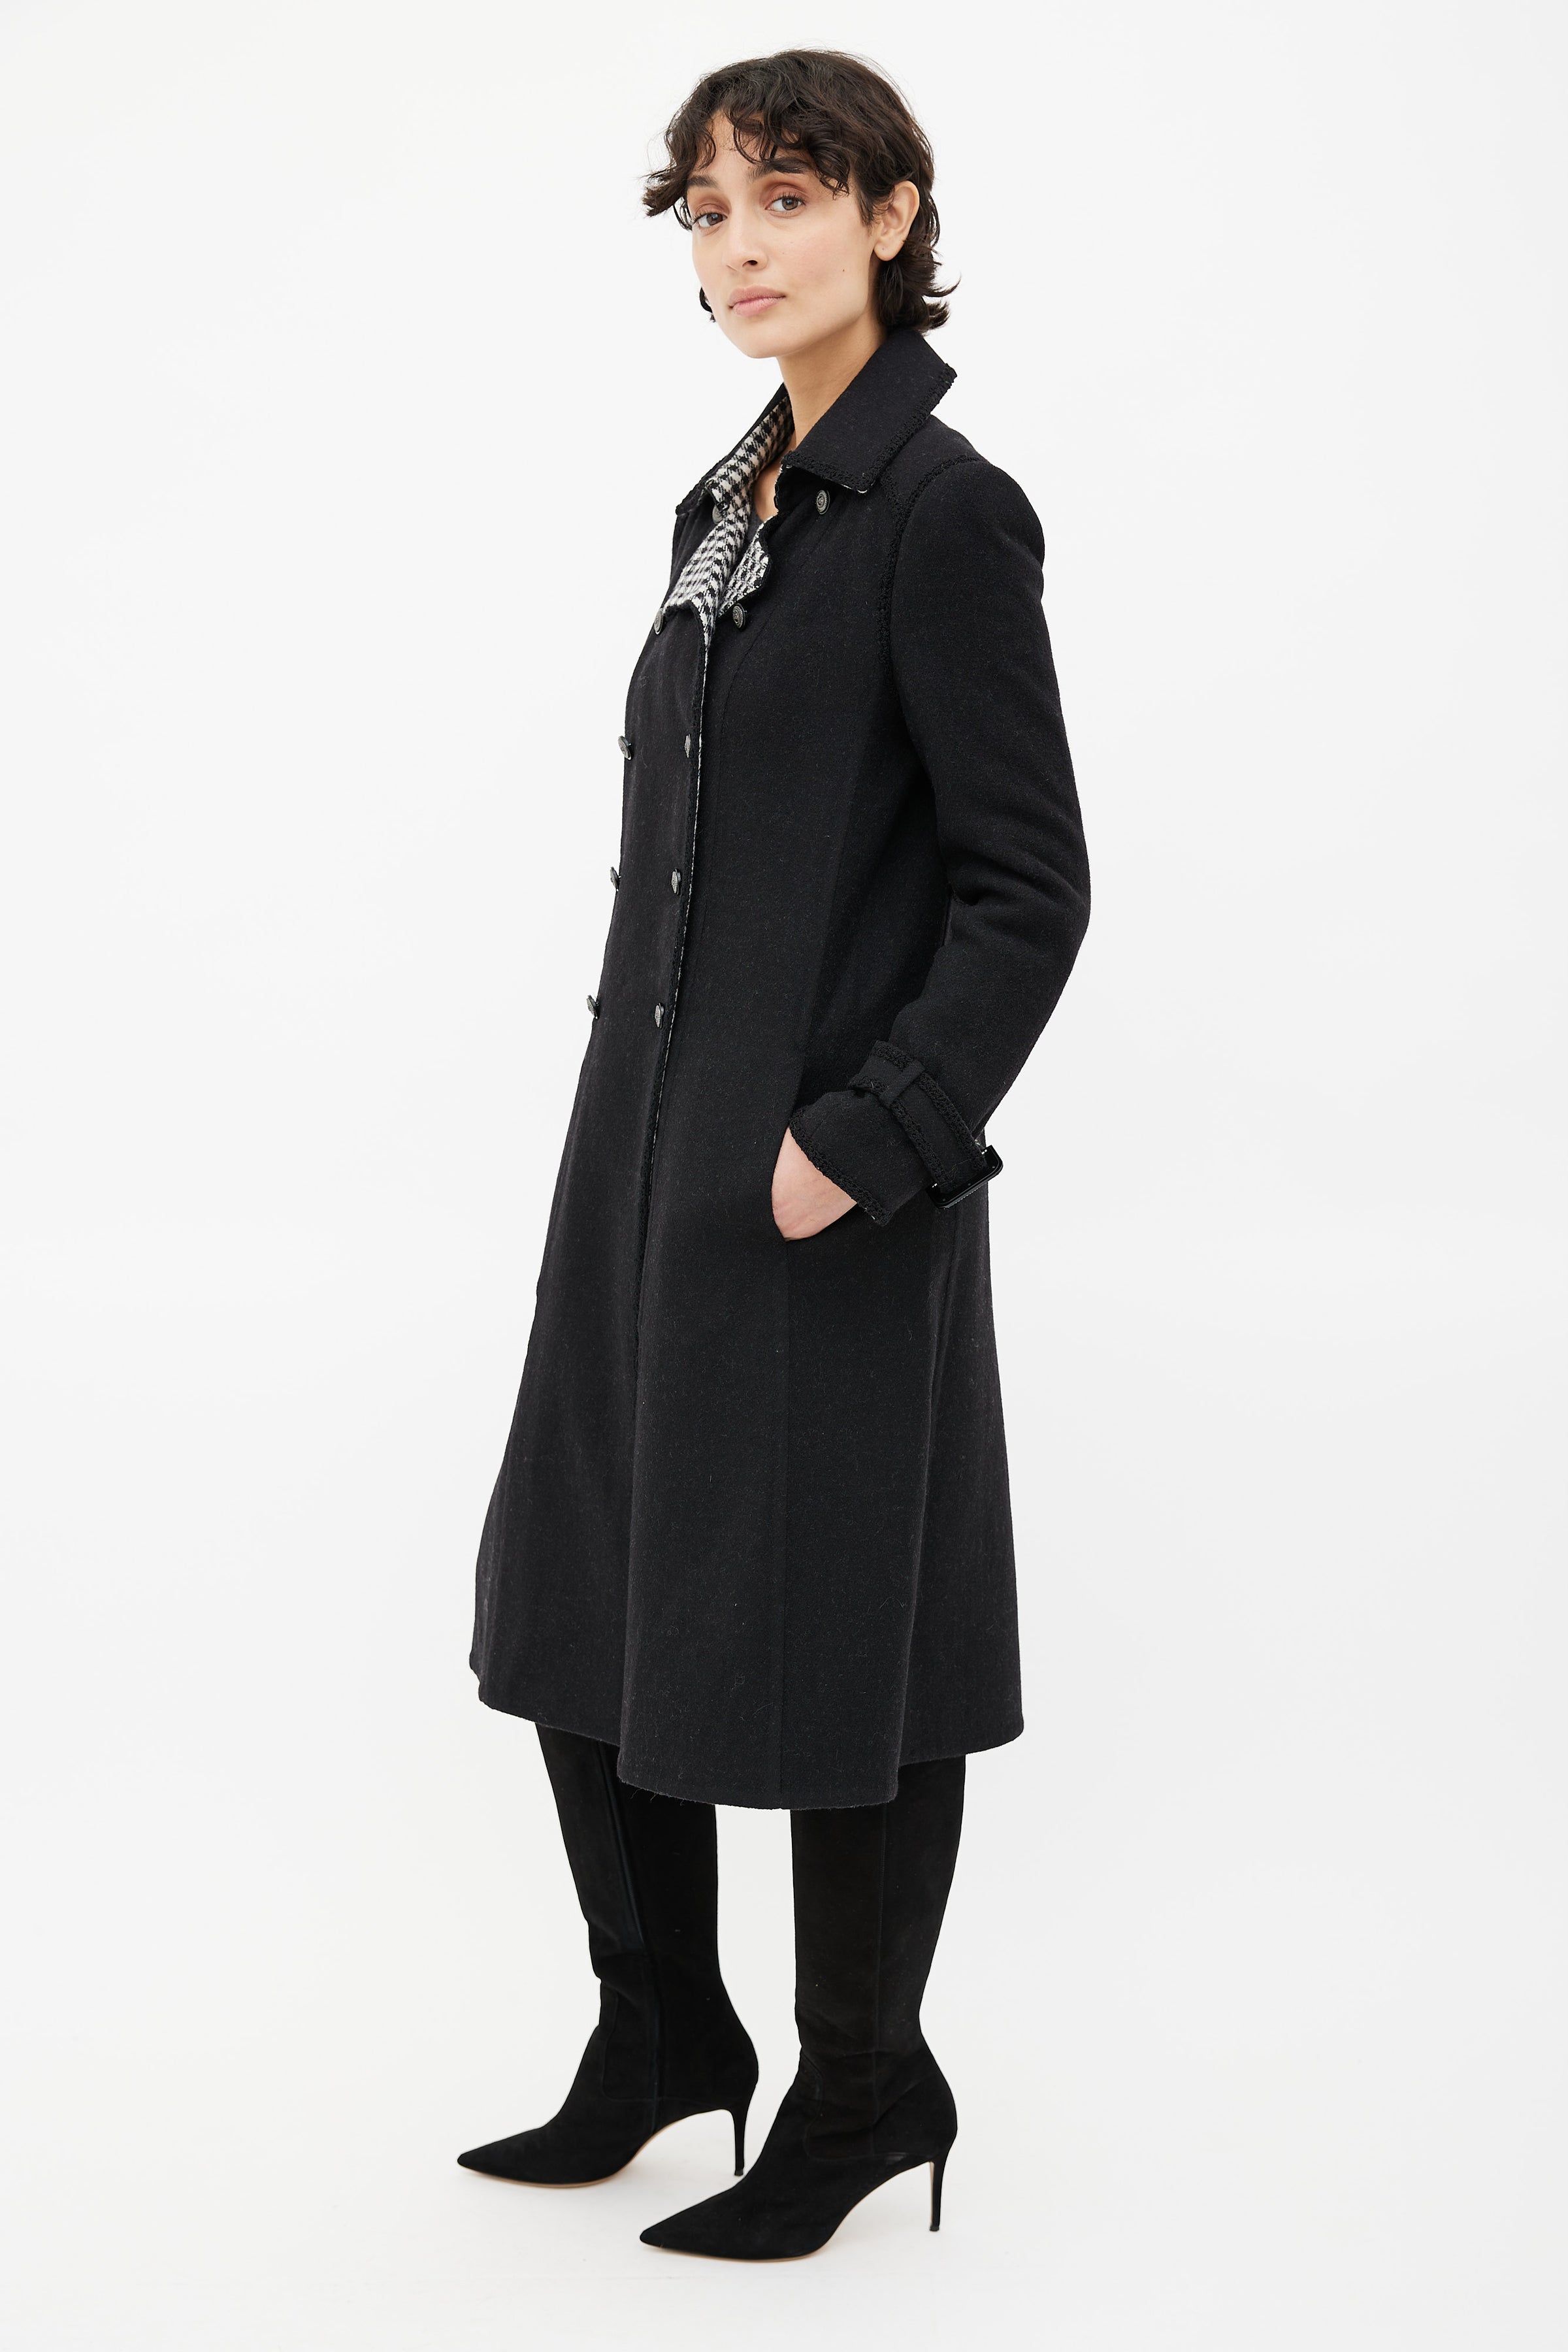 Chanel Authenticated Wool Trench Coat